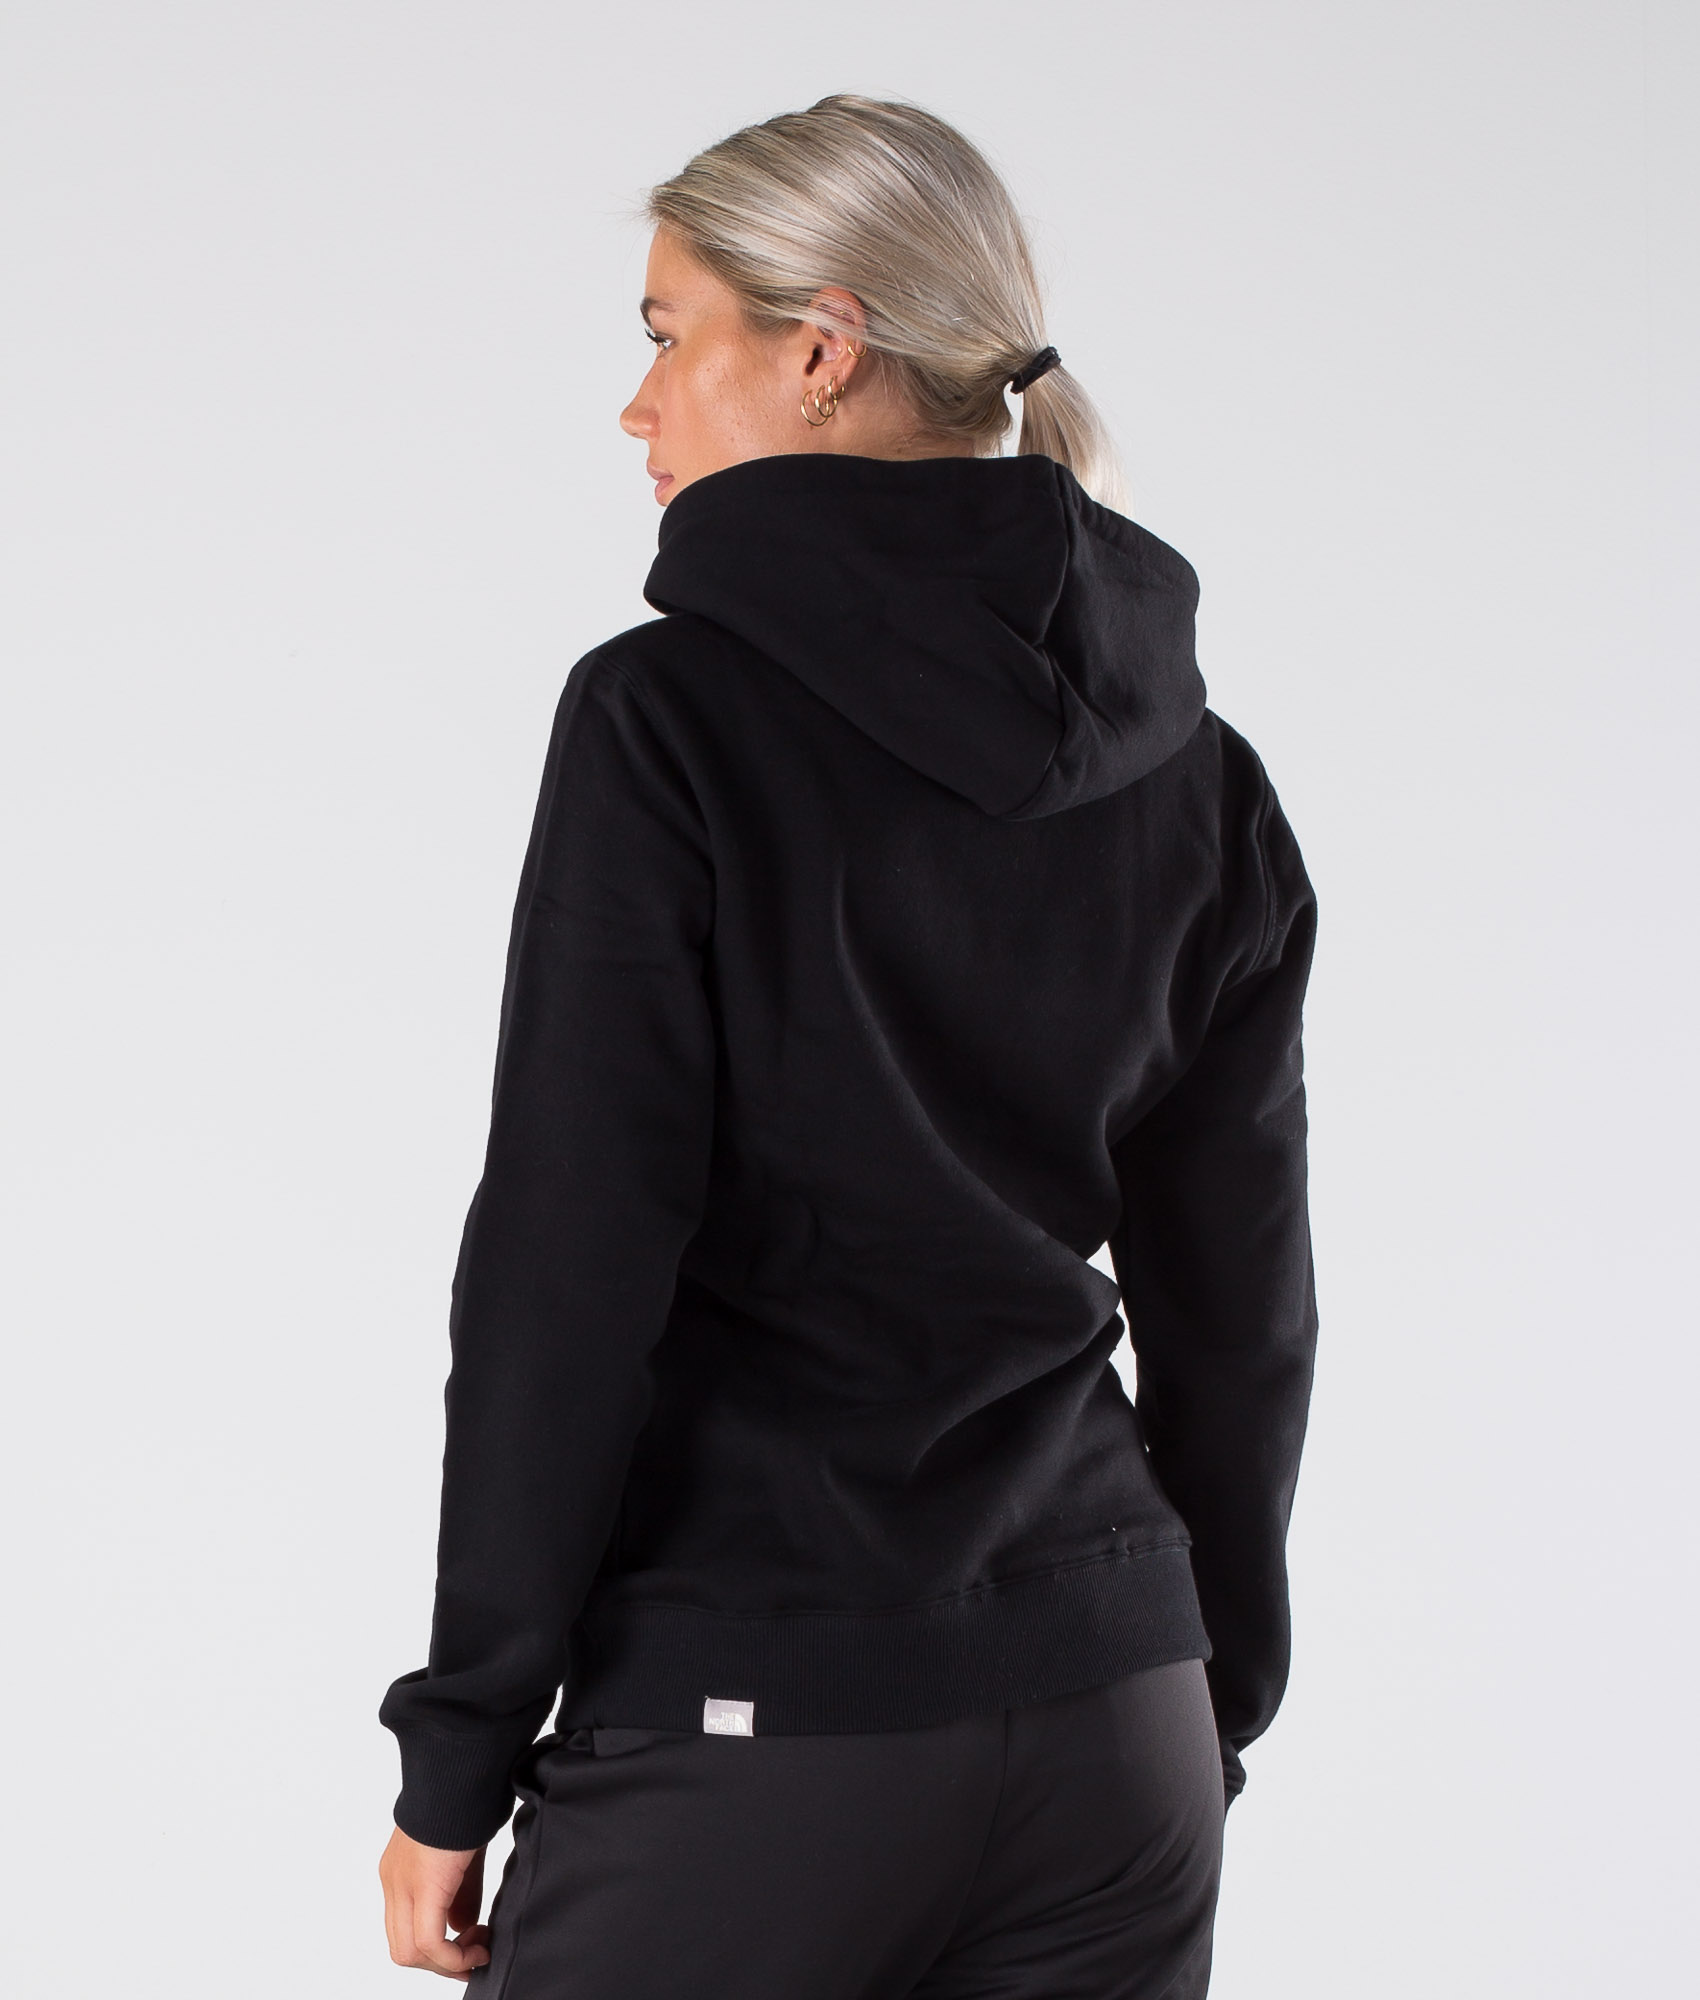 north face hoodie dames